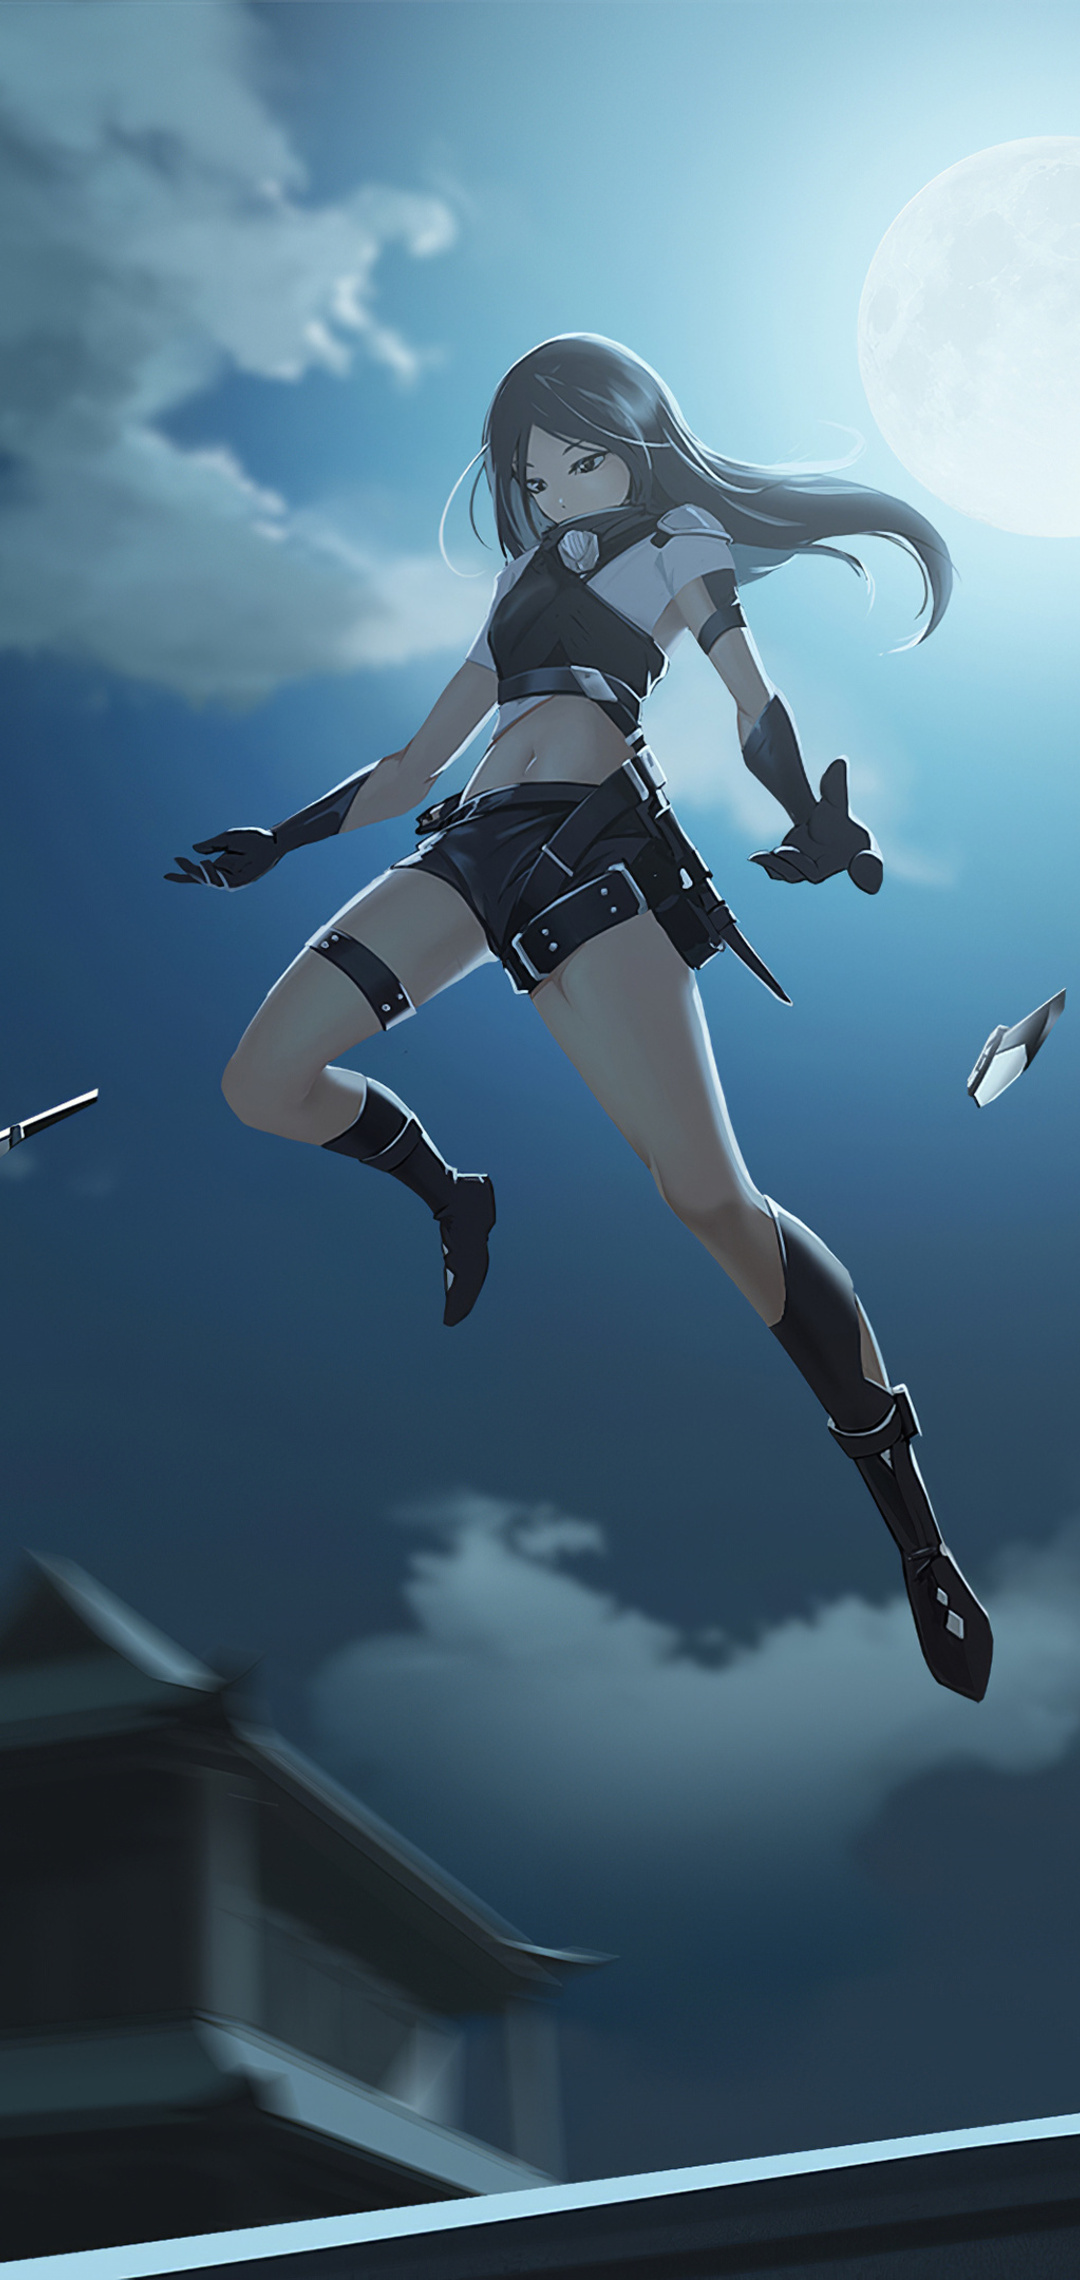 1080x2280 Anime Girl Attack Swords Small Weapons 4k One Plus 6,Huawei  p20,Honor view 10,Vivo y85,Oppo f7,Xiaomi Mi A2 HD 4k Wallpapers, Images,  Backgrounds, Photos and Pictures